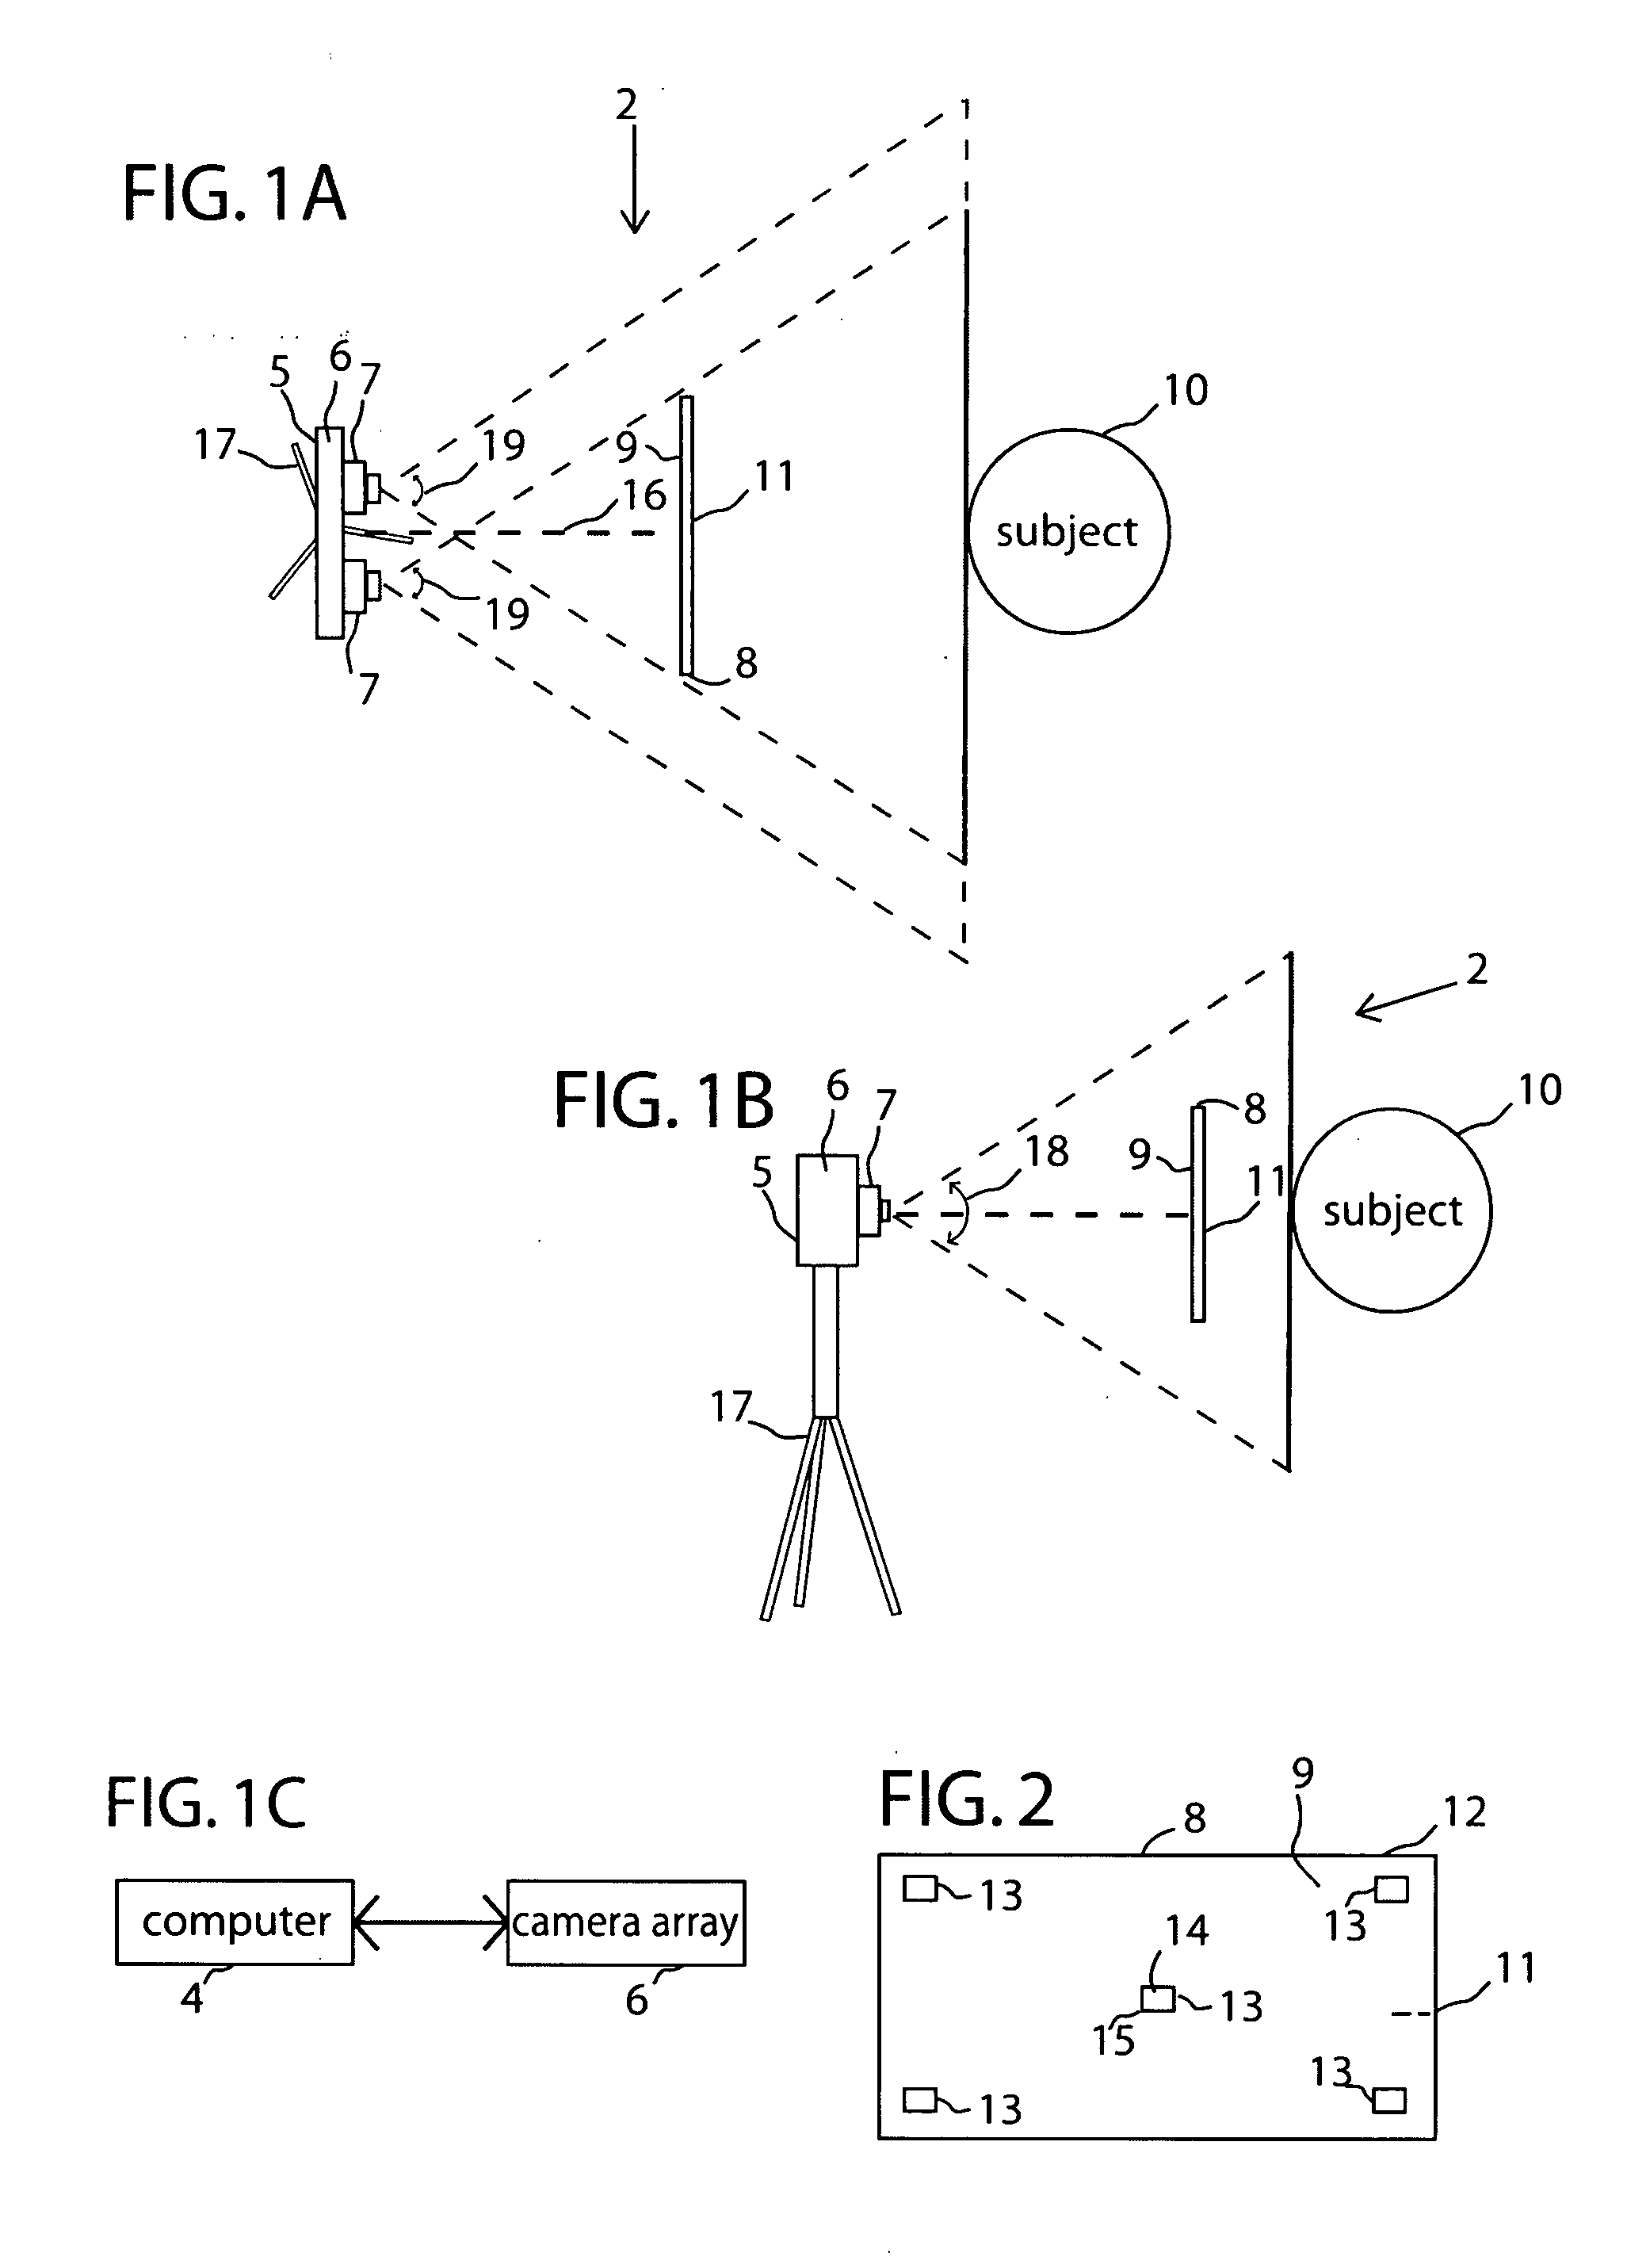 System and/or method for automated stereoscopic alignment of images